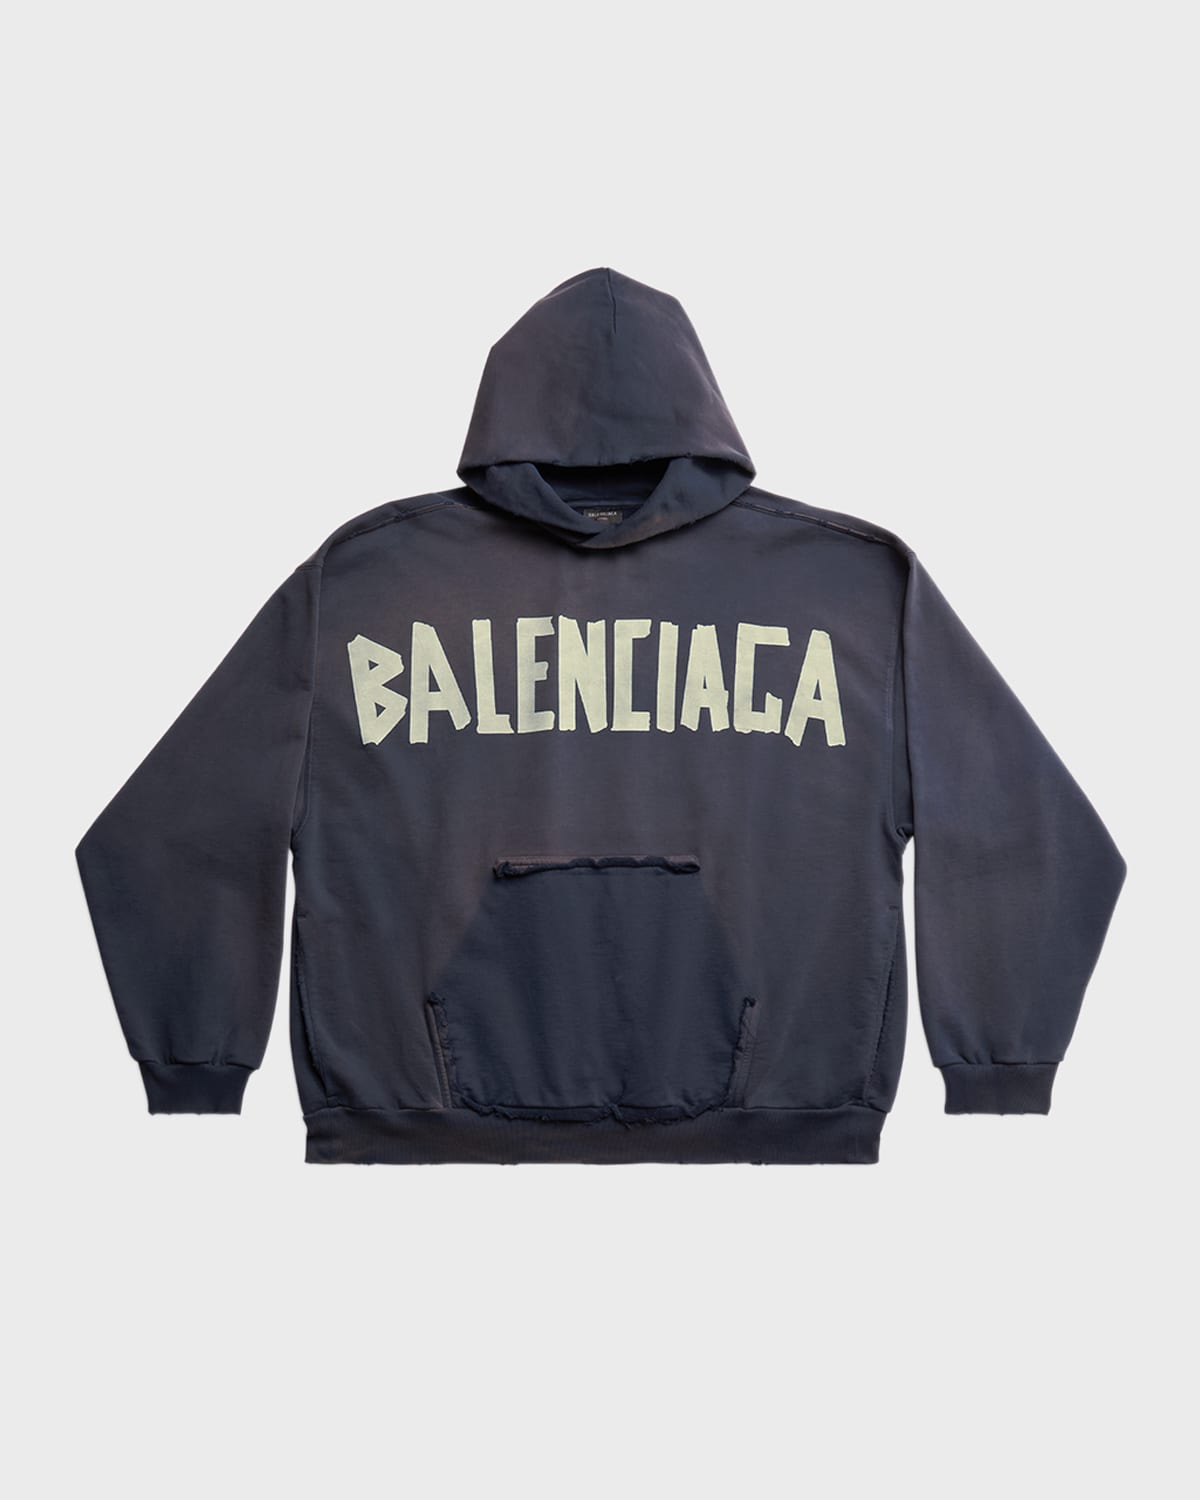 Balenciaga Men's Tape Type Ripped Pocket Hoodie Large Fit In 4140 Marine Blue